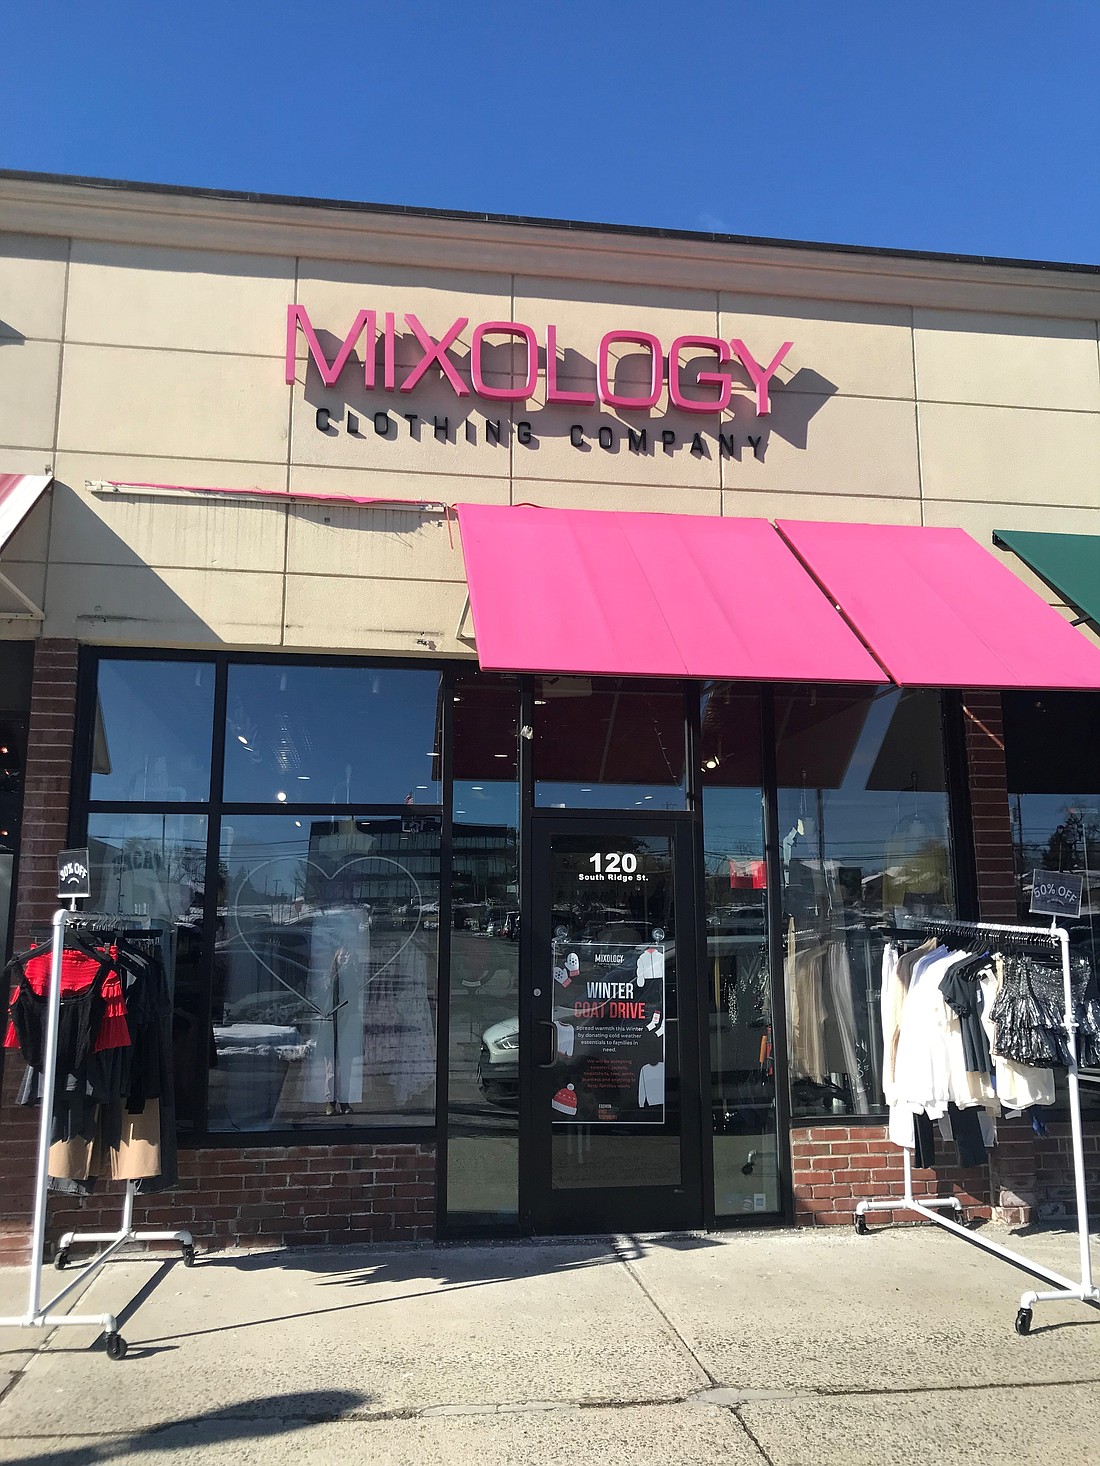 At left, SBG Home & Design will be opening at the current Mixology location at the Rye Ridge Shopping Center in late spring.